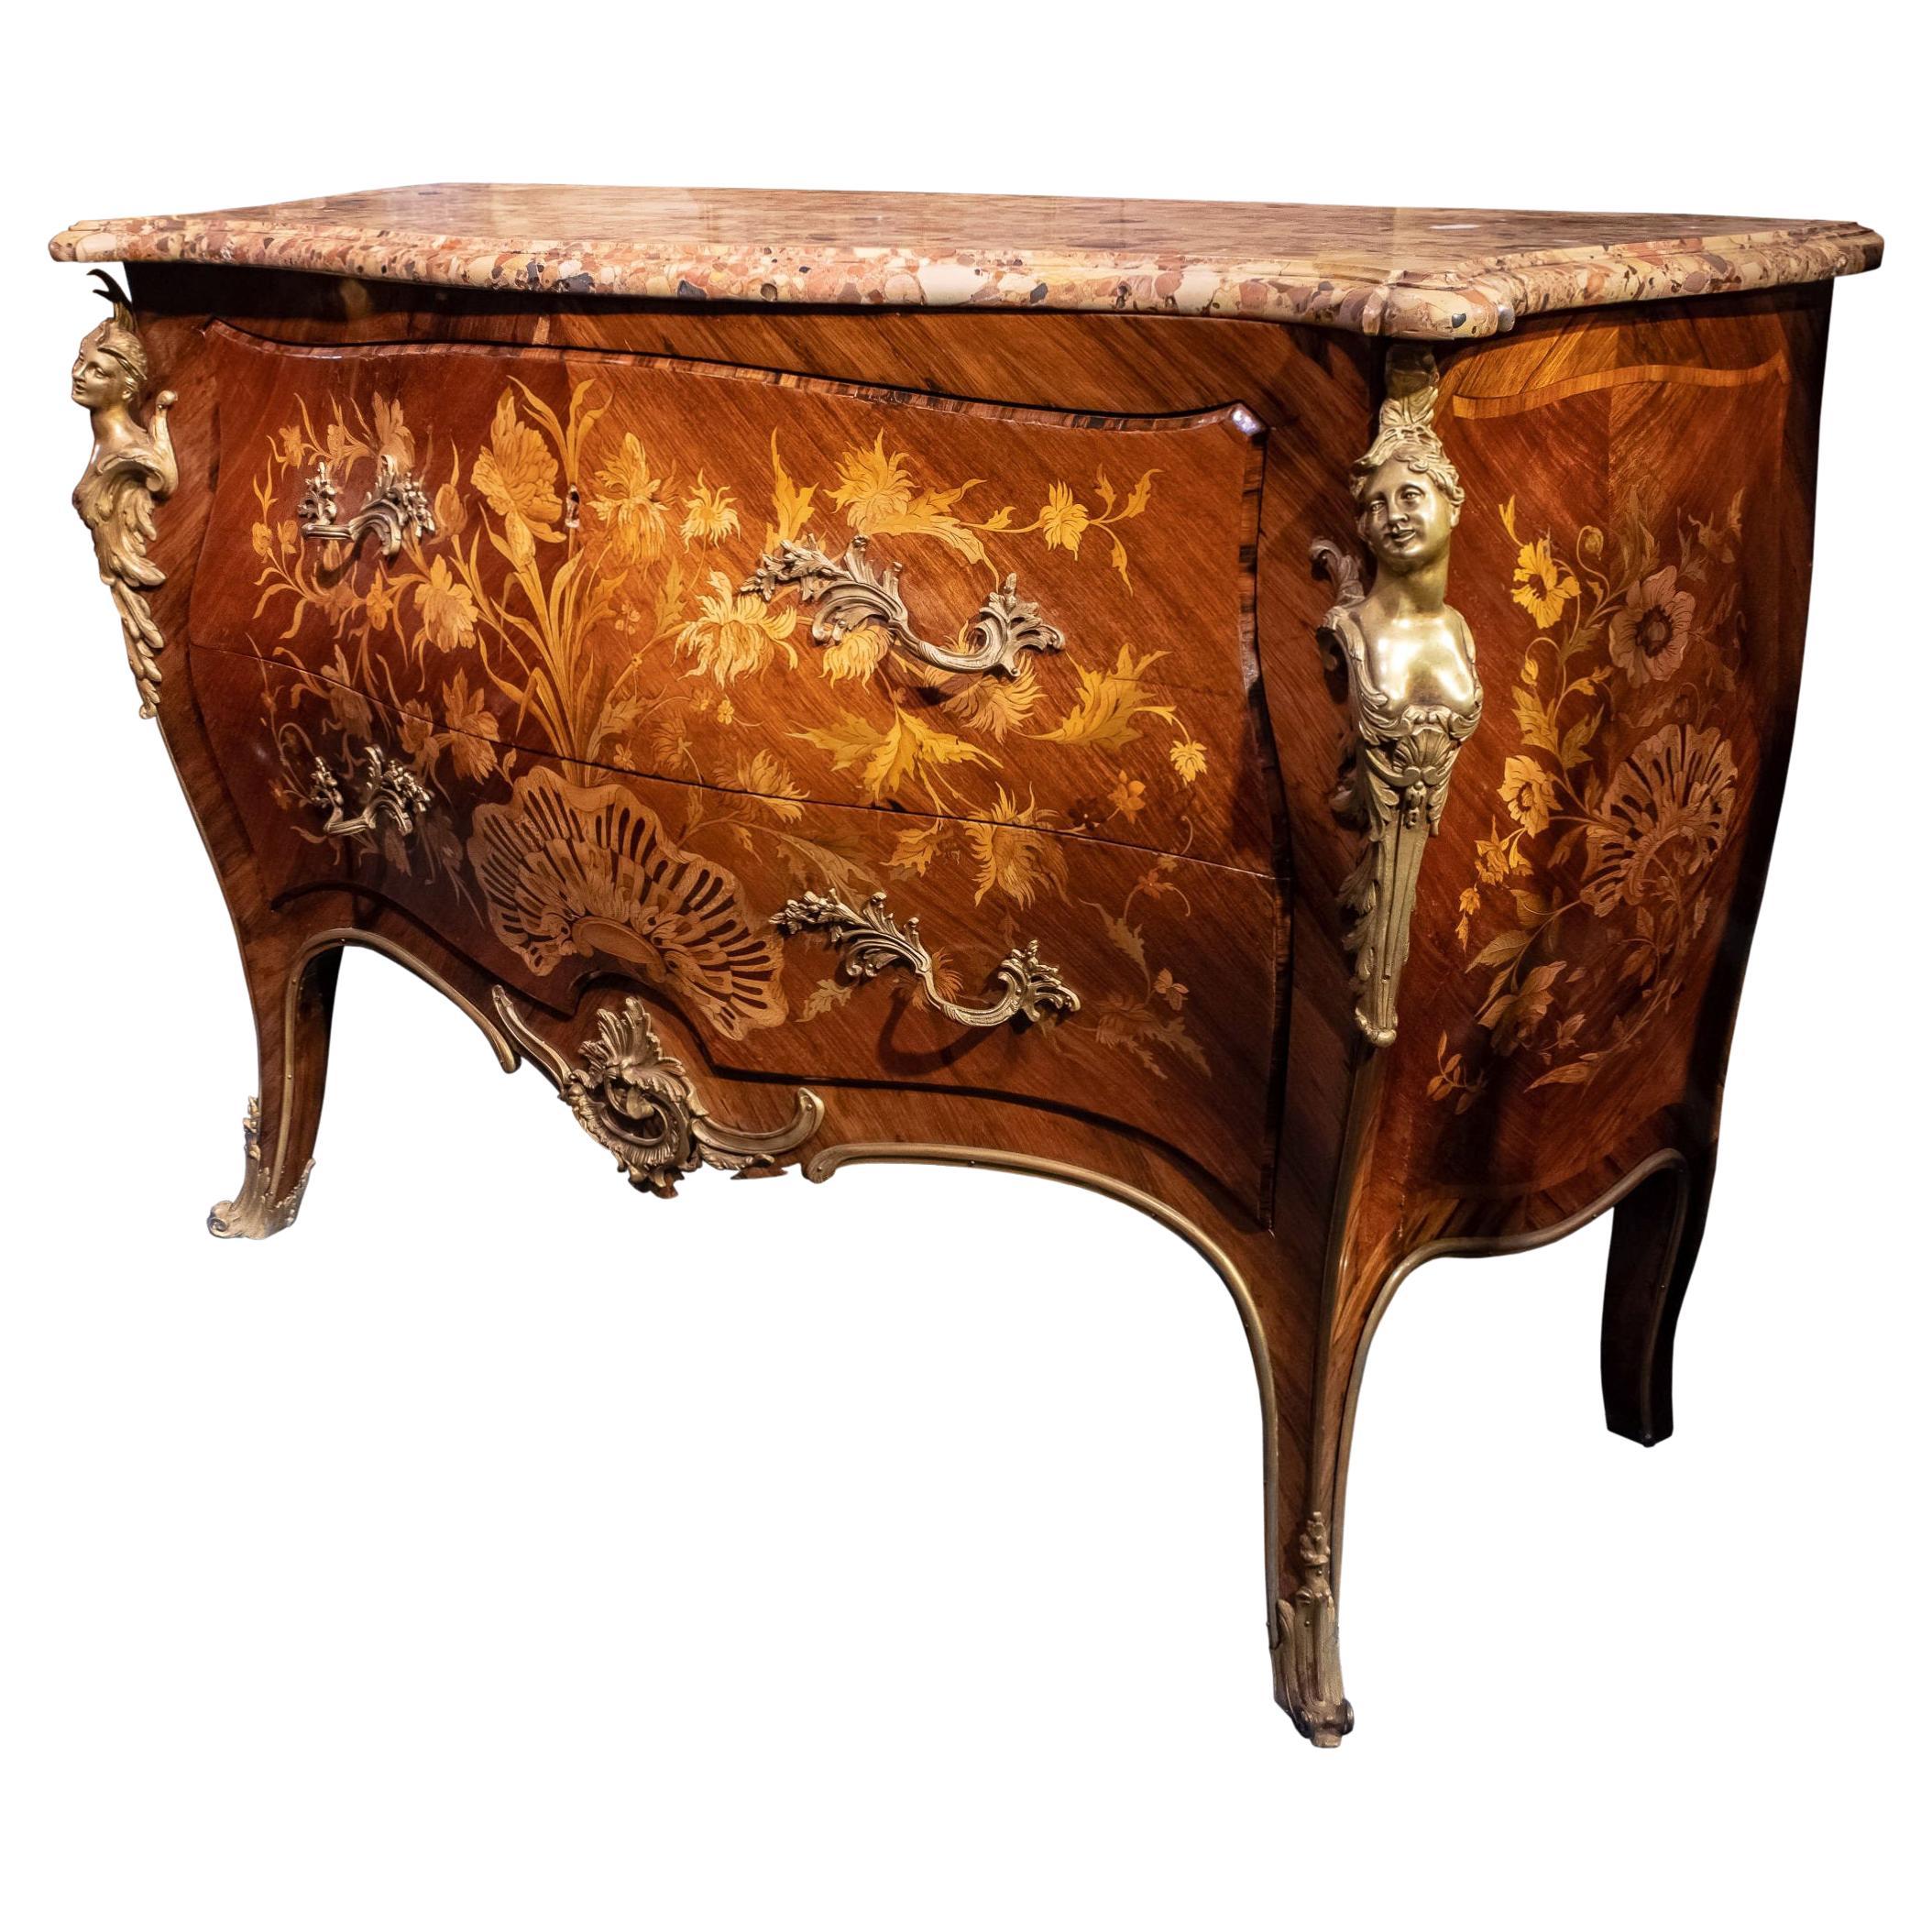 French 19 Century Louis XVI Style Marquetry Inlaid Gilt Bronze-Mounted Commode 